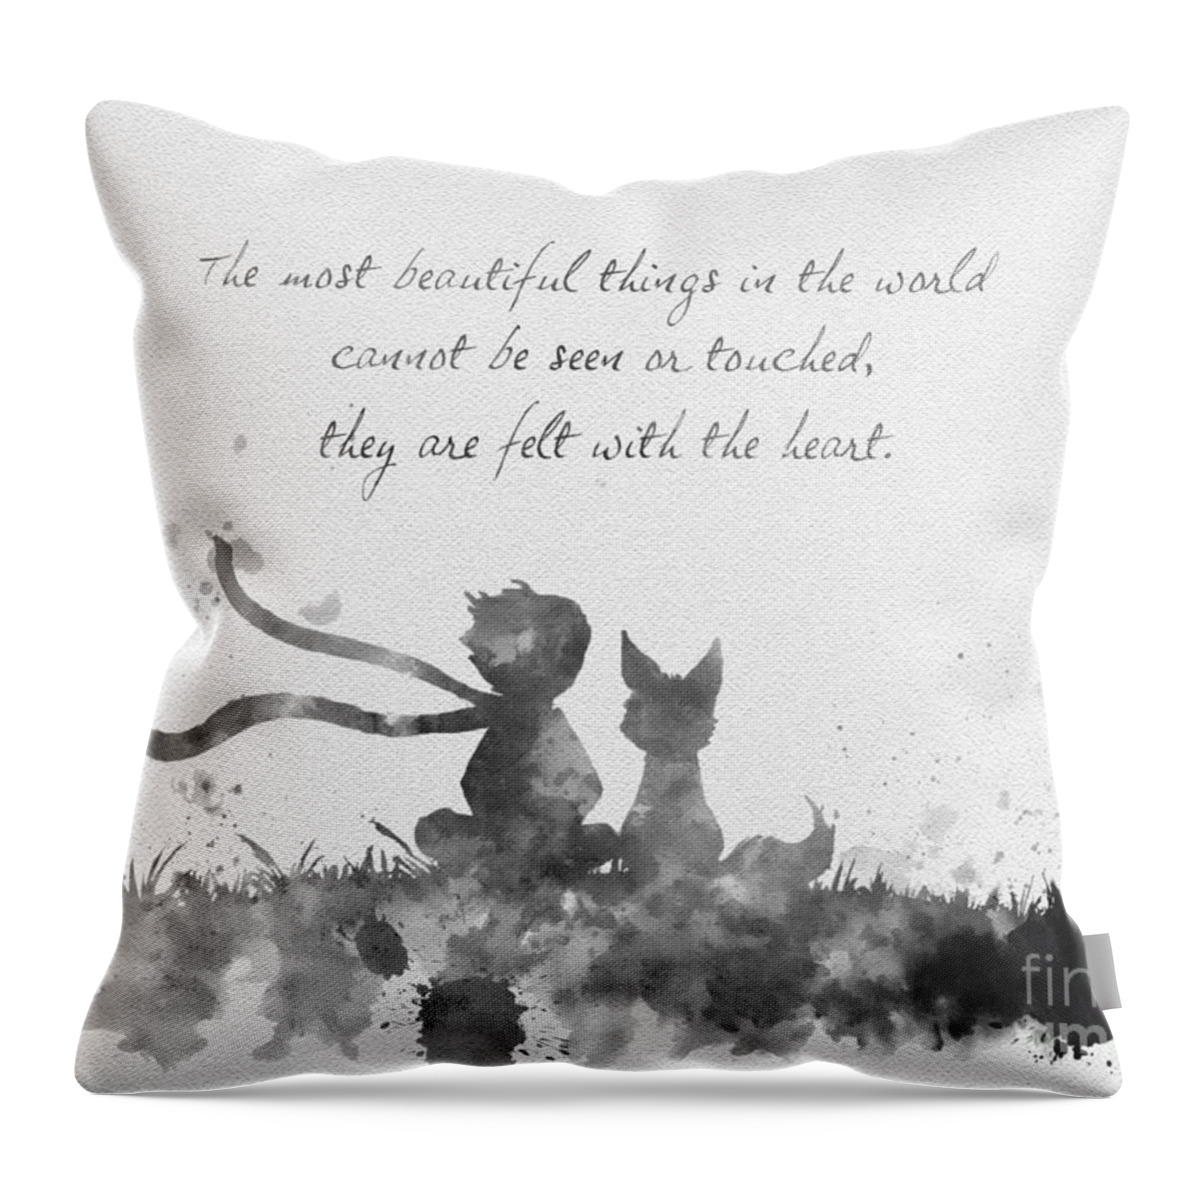 Little Prince Throw Pillow featuring the photograph Felt With The Heart Black and White by My Inspiration